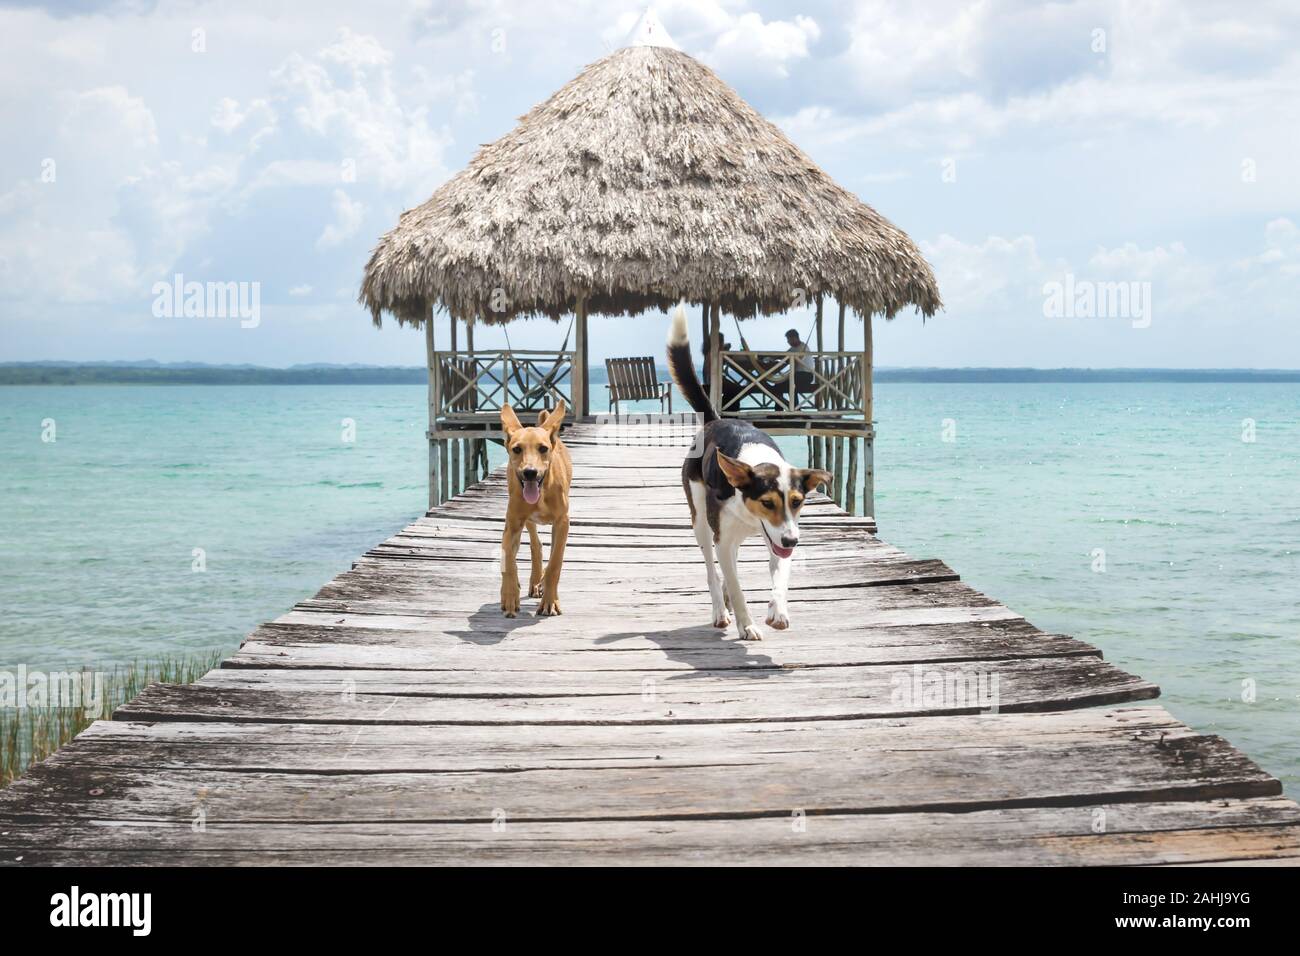 Two dogs running from a wooden pier with palm leaf roof on a sunny day, El Remate, Peten, Guatemala Stock Photo